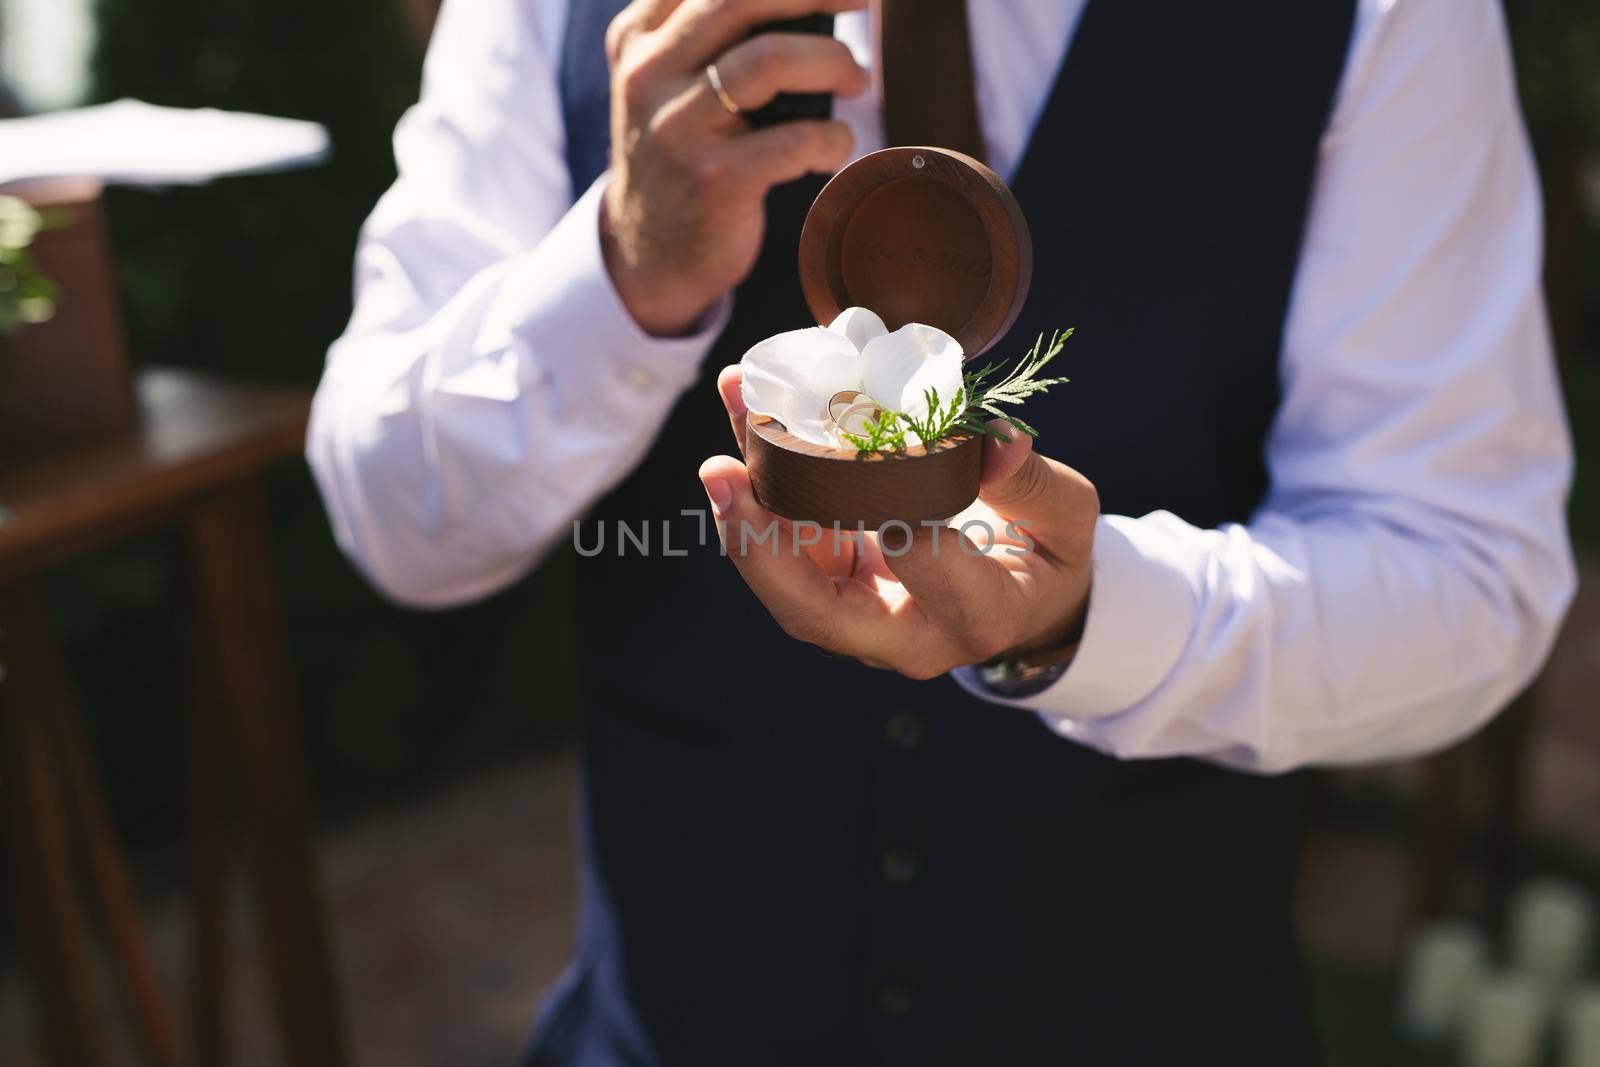 Wedding gold rings in a wooden box, wedding rings in the hands of the groom.